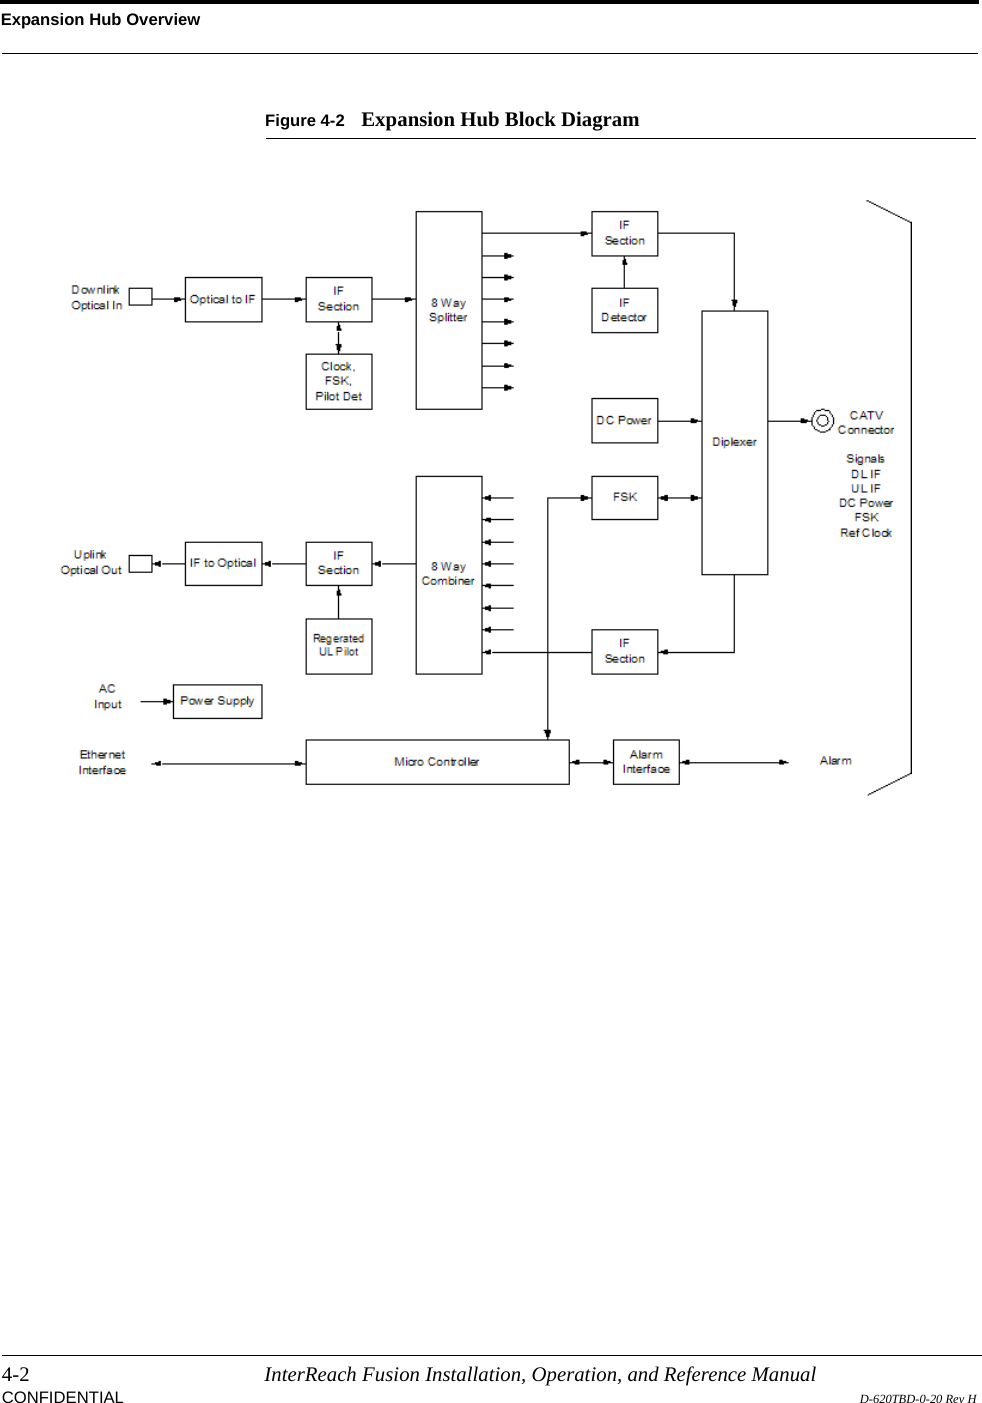 Expansion Hub Overview4-2 InterReach Fusion Installation, Operation, and Reference ManualCONFIDENTIAL D-620TBD-0-20 Rev HFigure 4-2 Expansion Hub Block Diagram